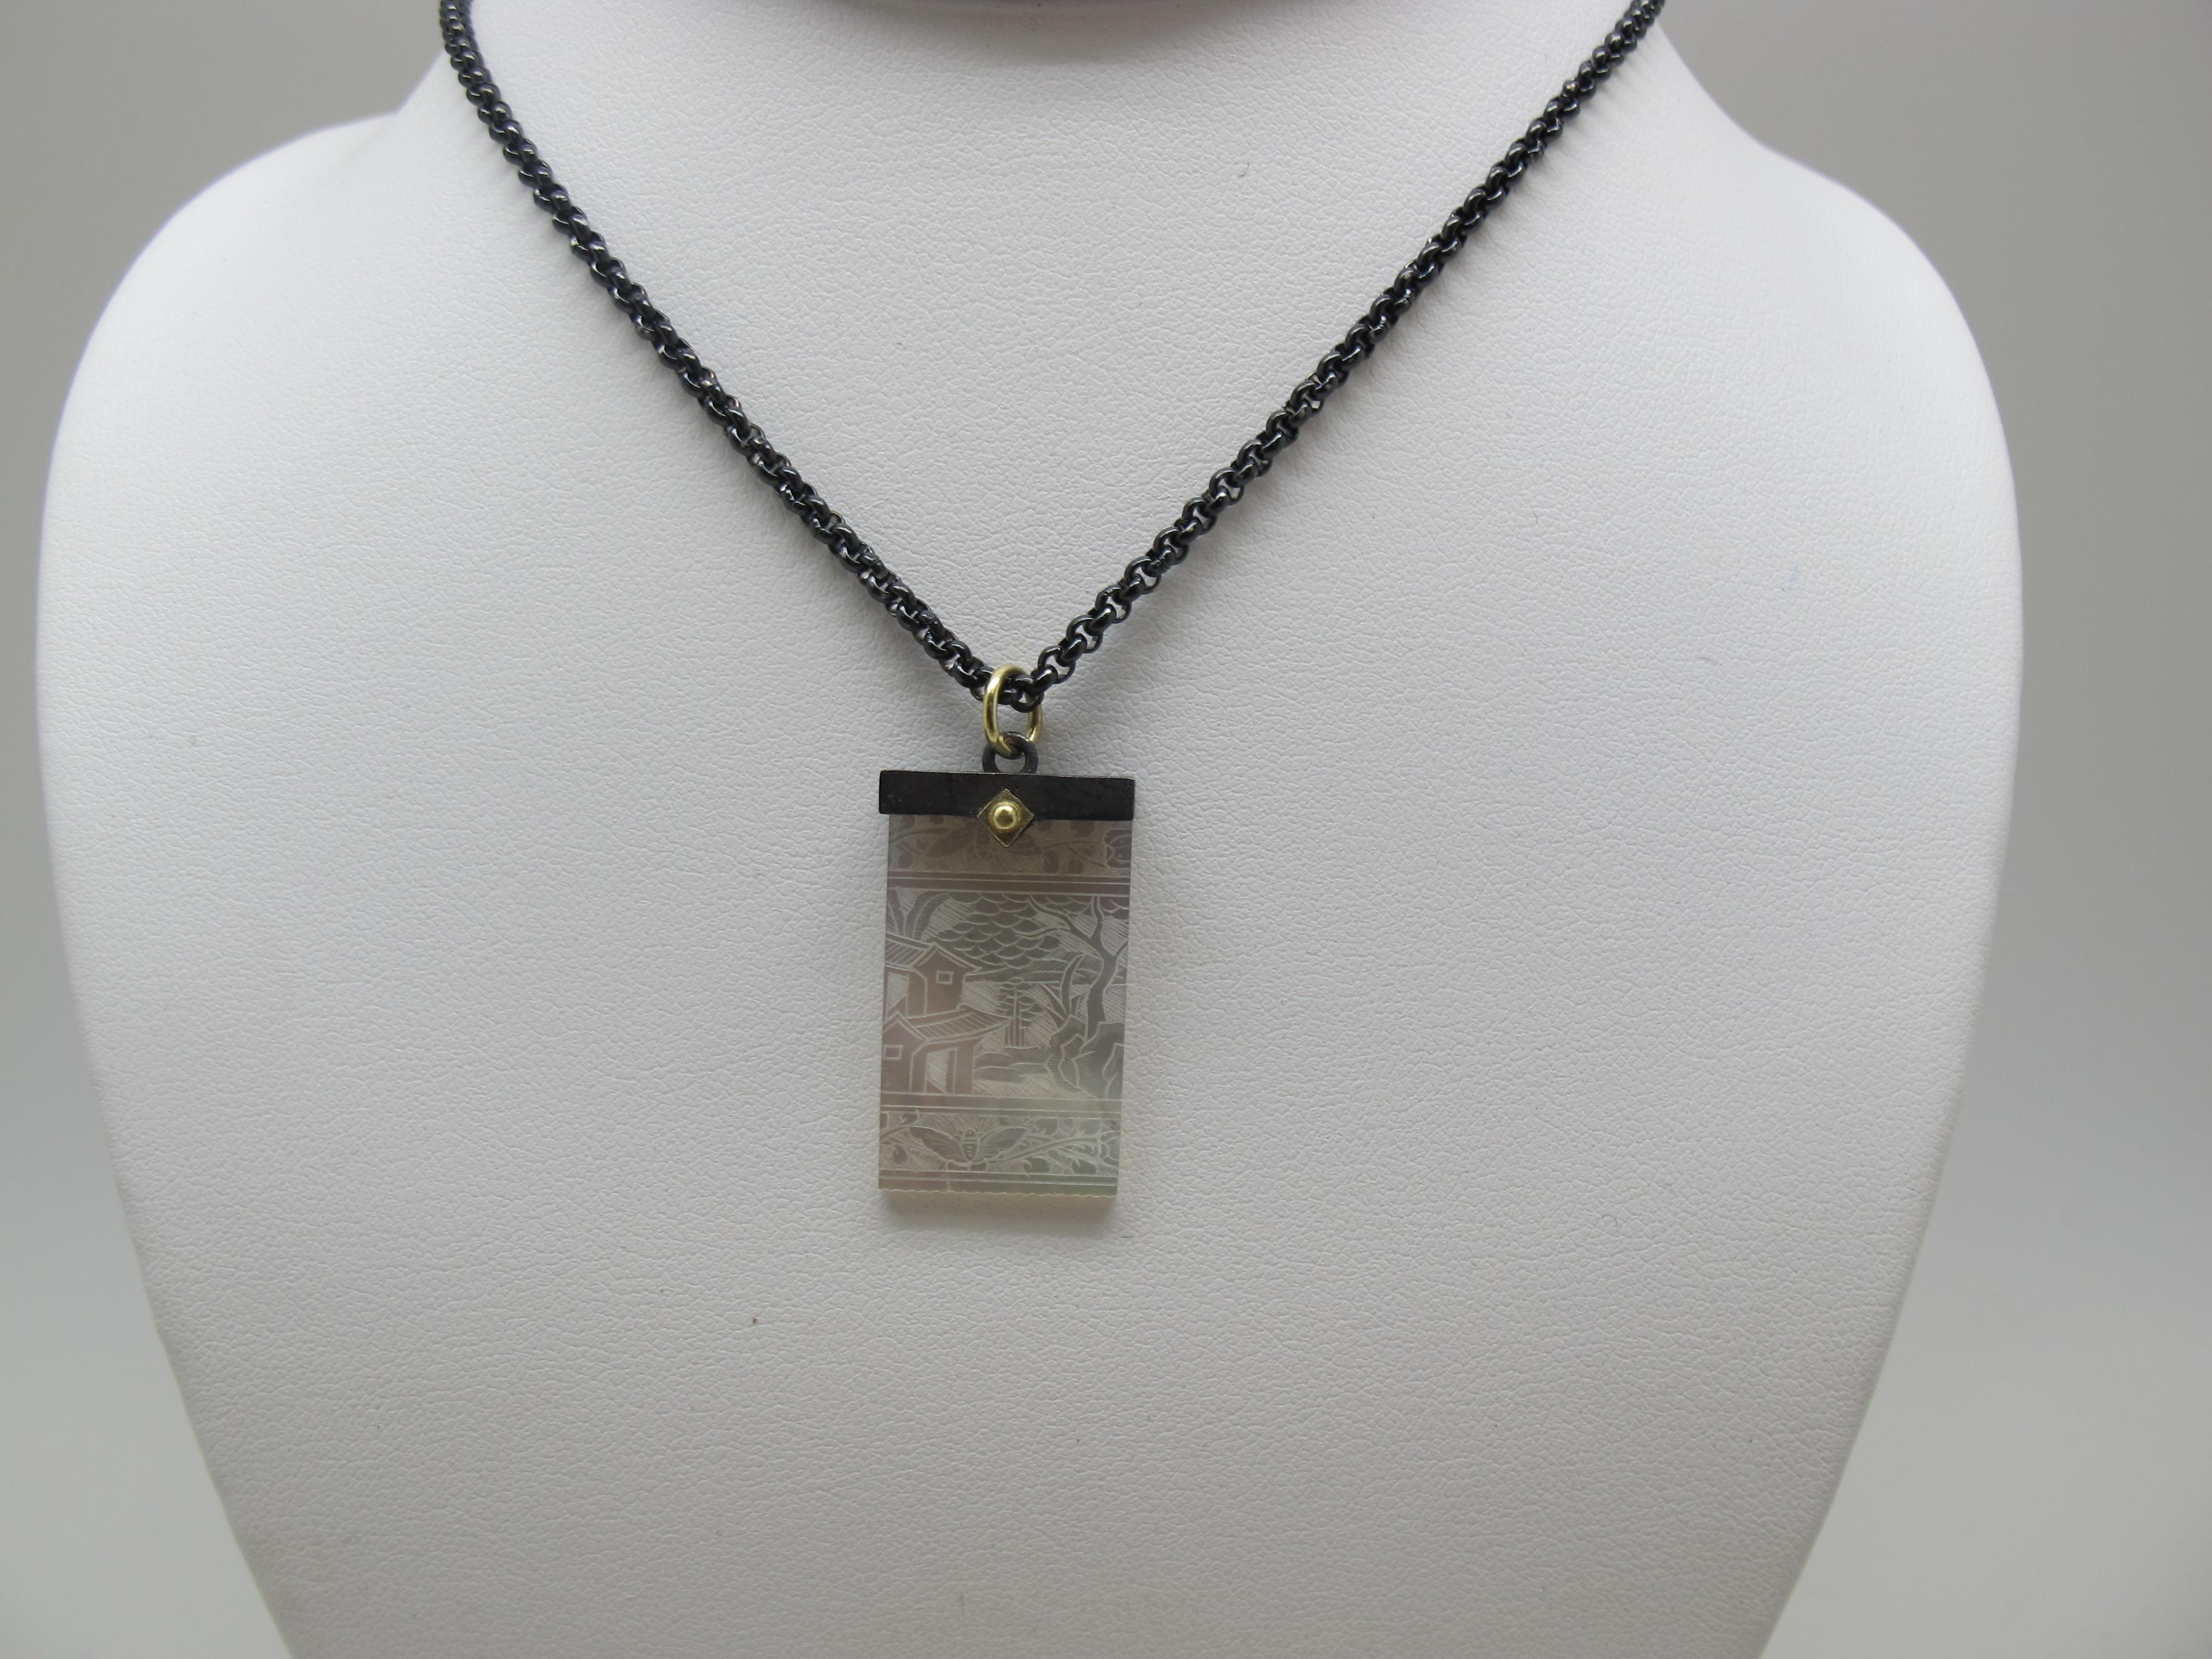 Antique Mother of Pearl Gambling Chip, Gold/Blackened Silver Pendant Necklace 3